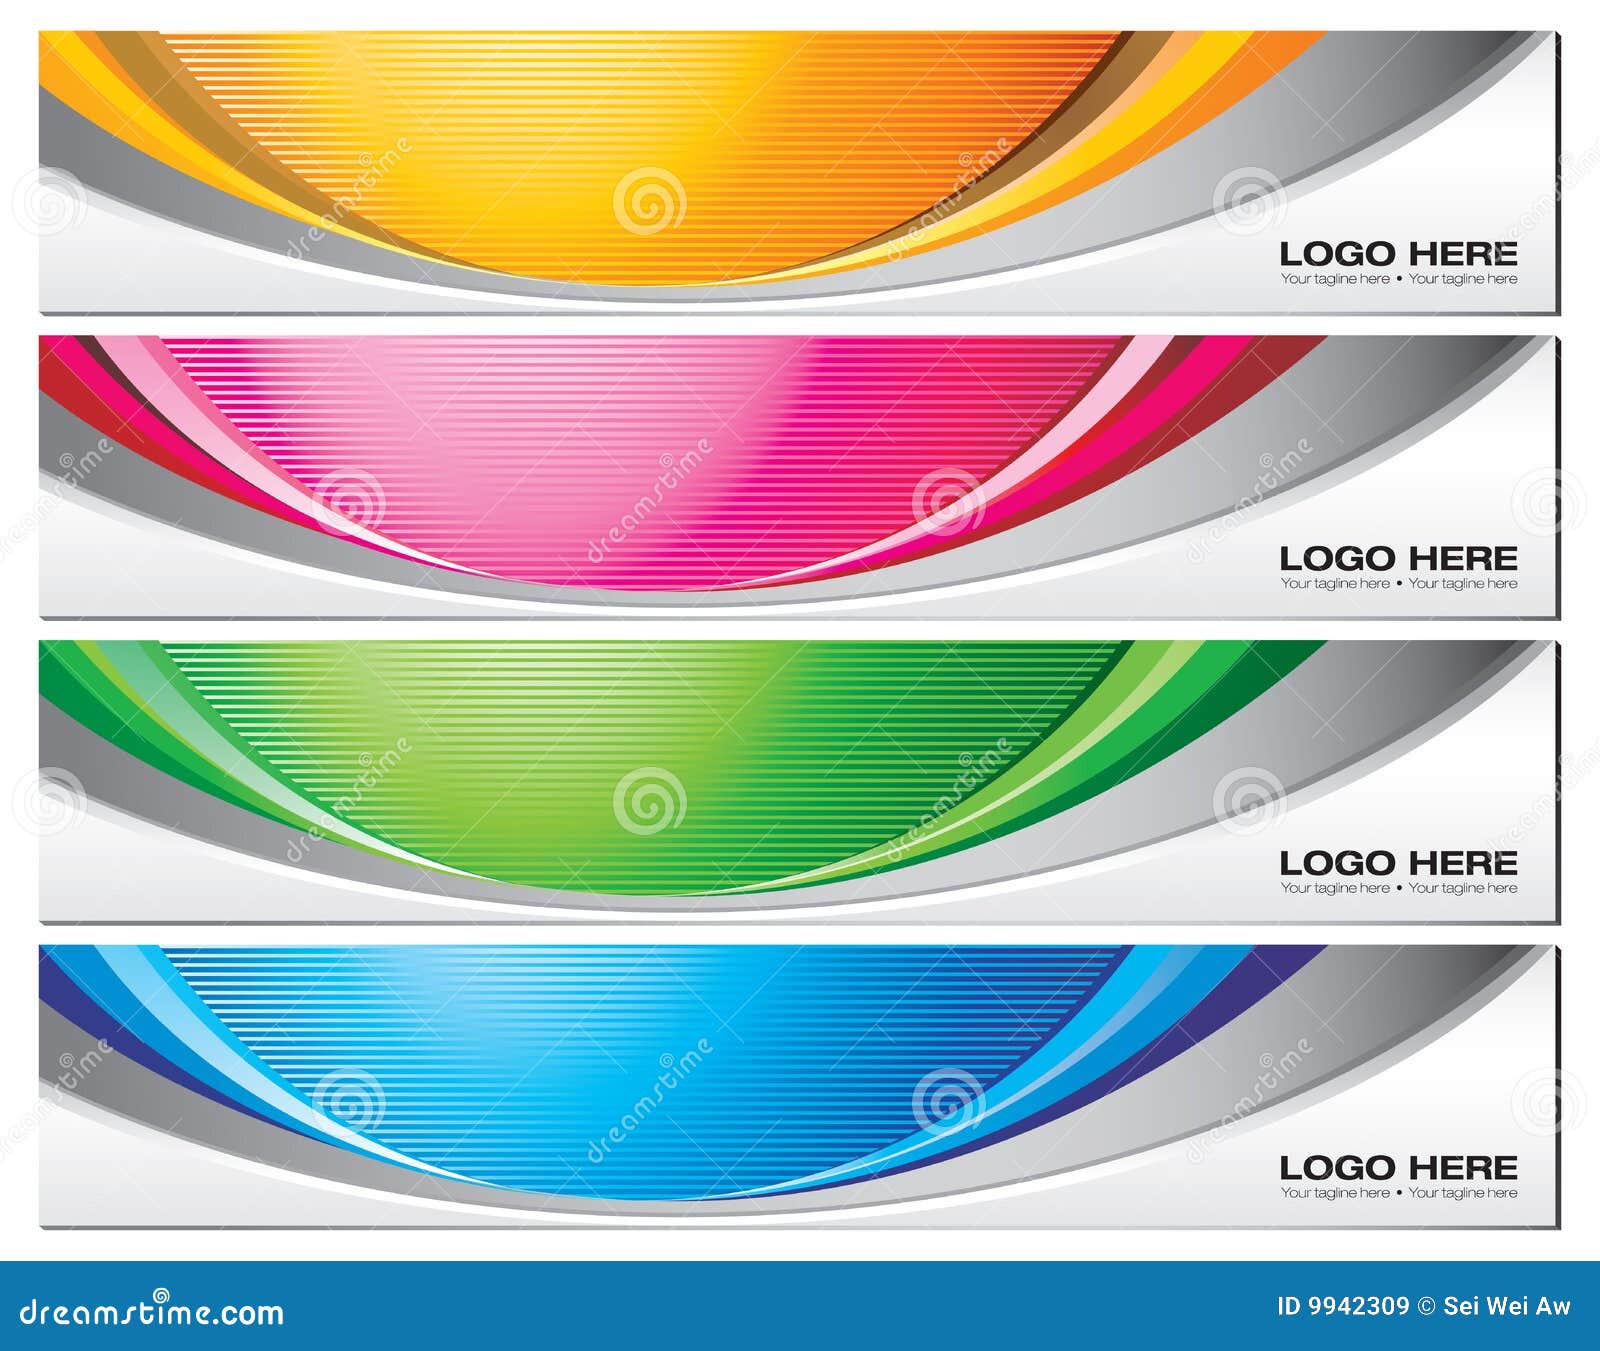 Banner Templates stock vector. Illustration of cool, colorful In Free Online Banner Templates